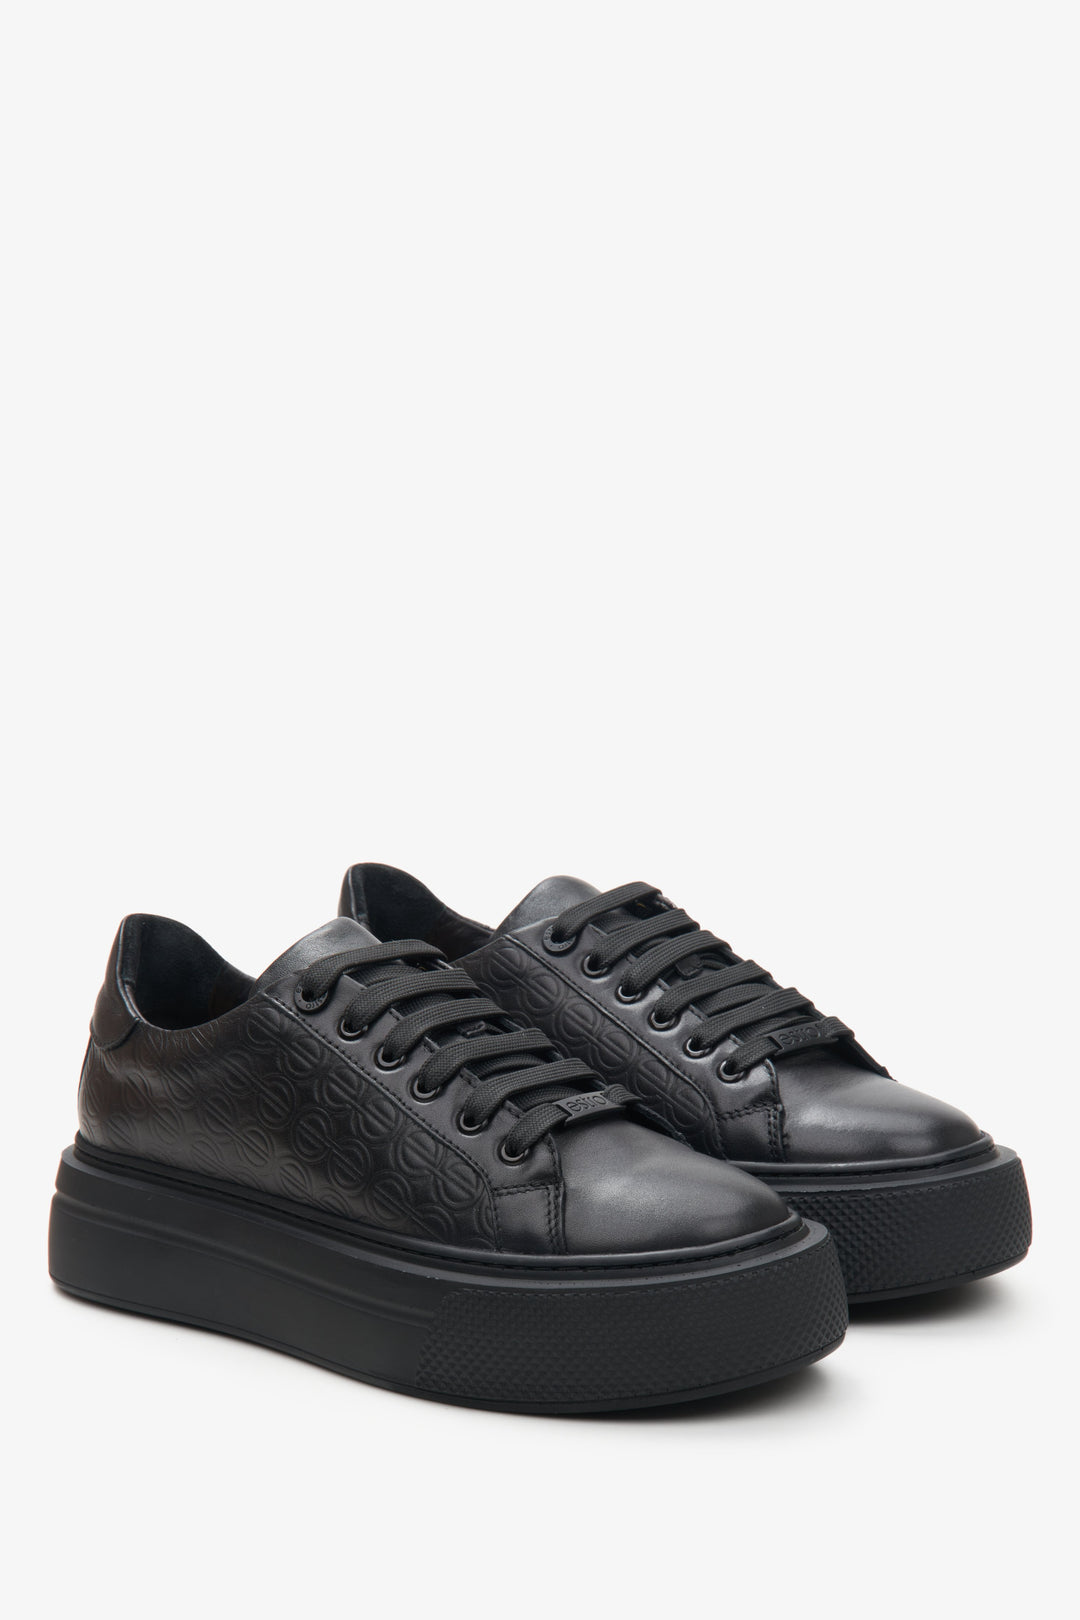 Women's black sneakers made of genuine leather with thick sole.